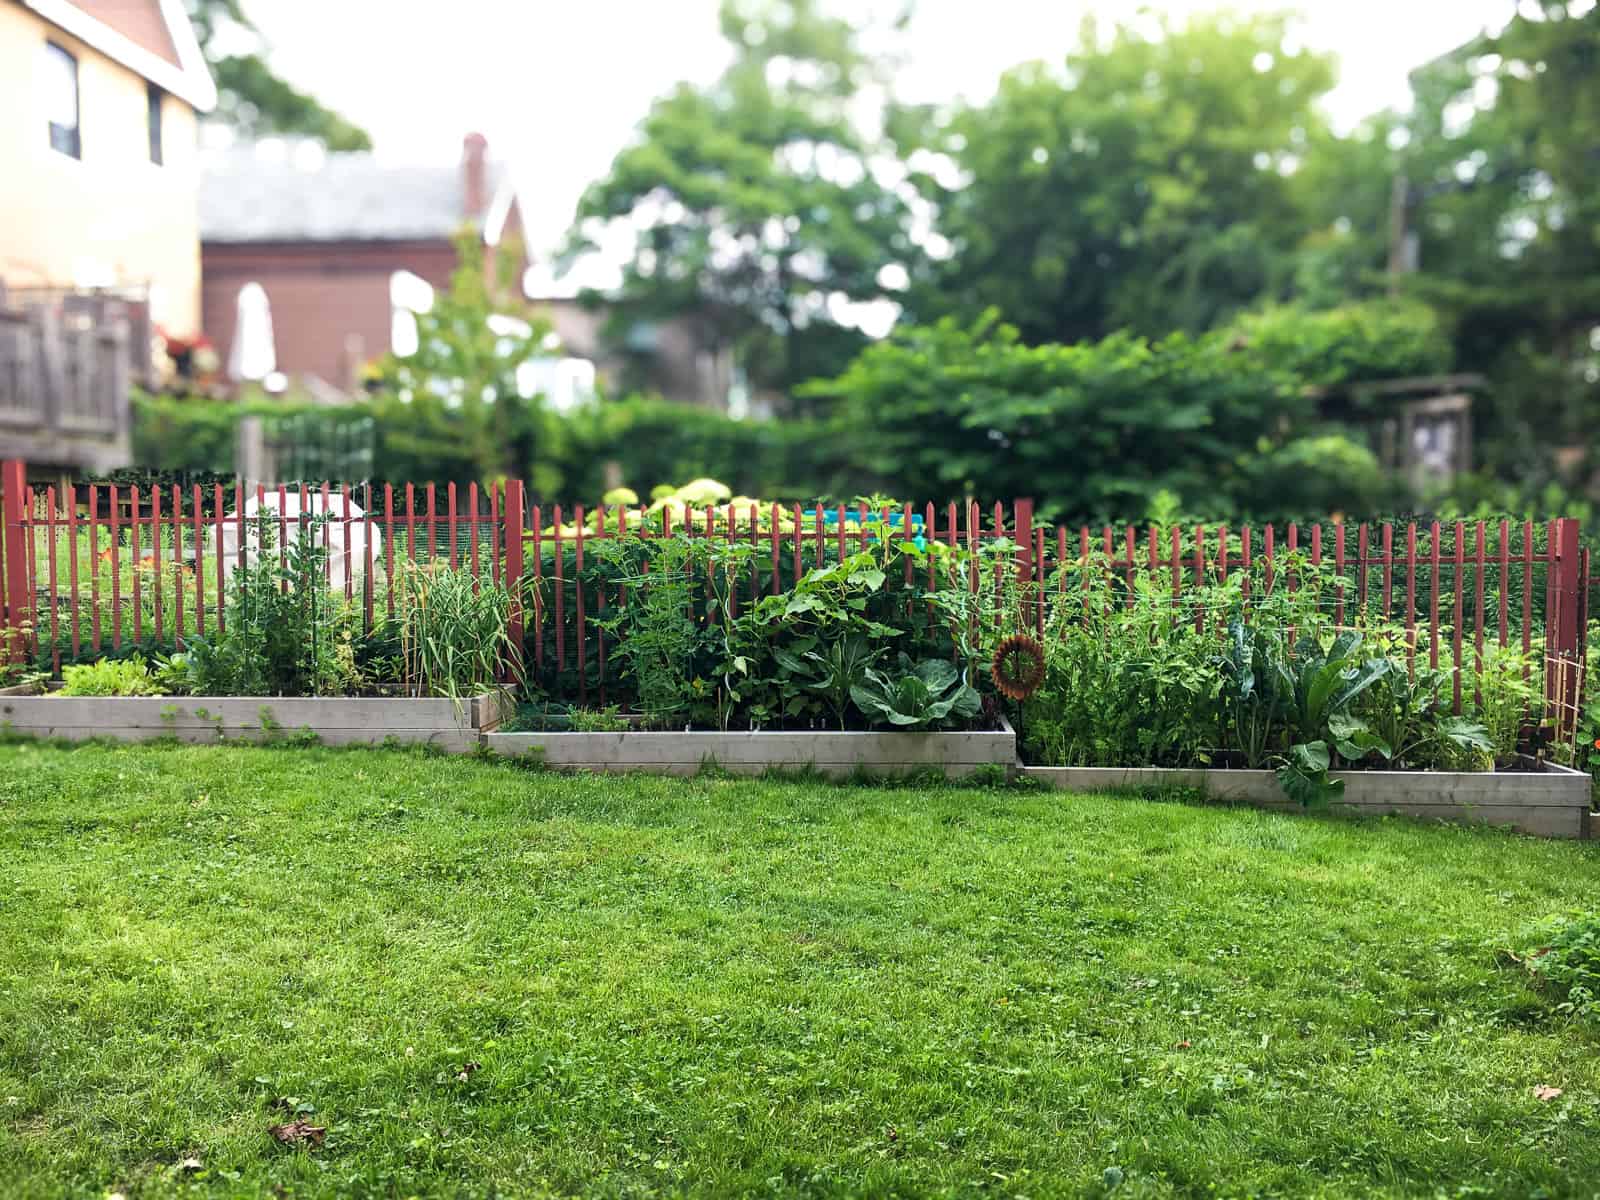 An image of a series of raised beds in a backyard garden.